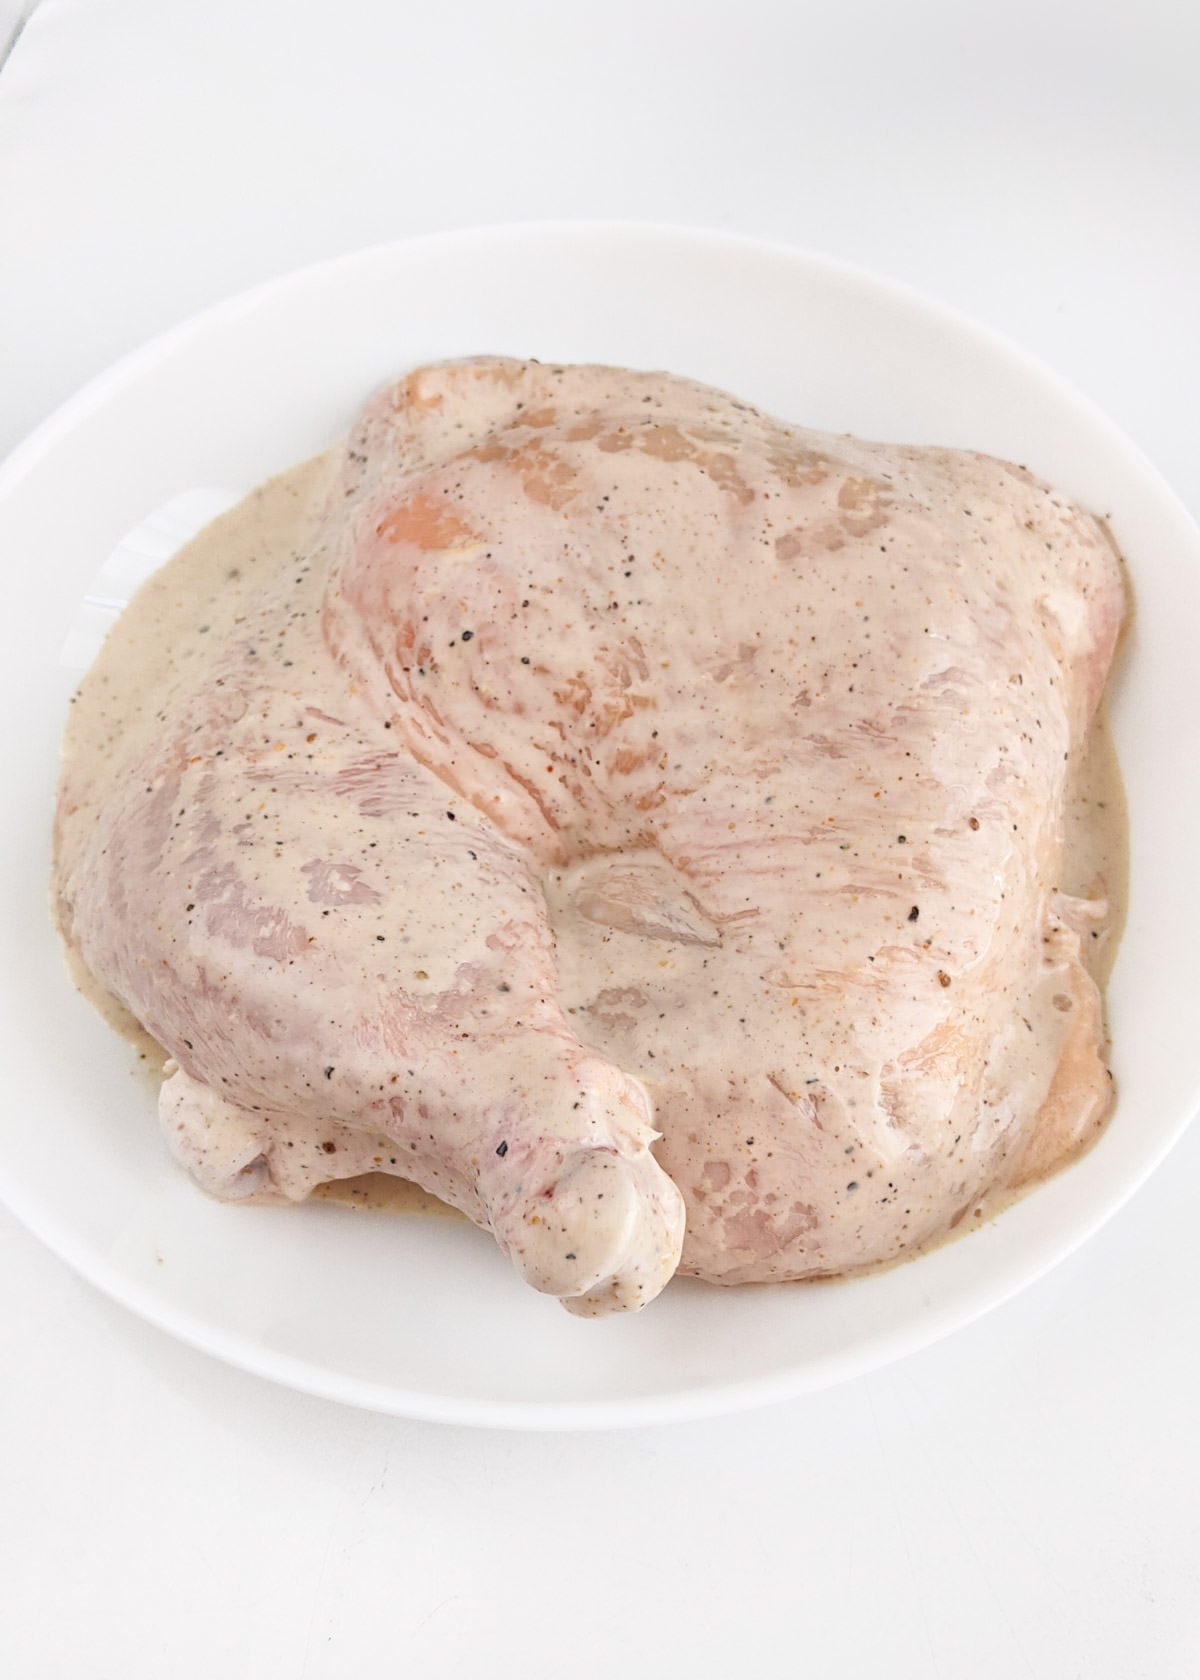 Chicken quarters in marinade in a white plate.